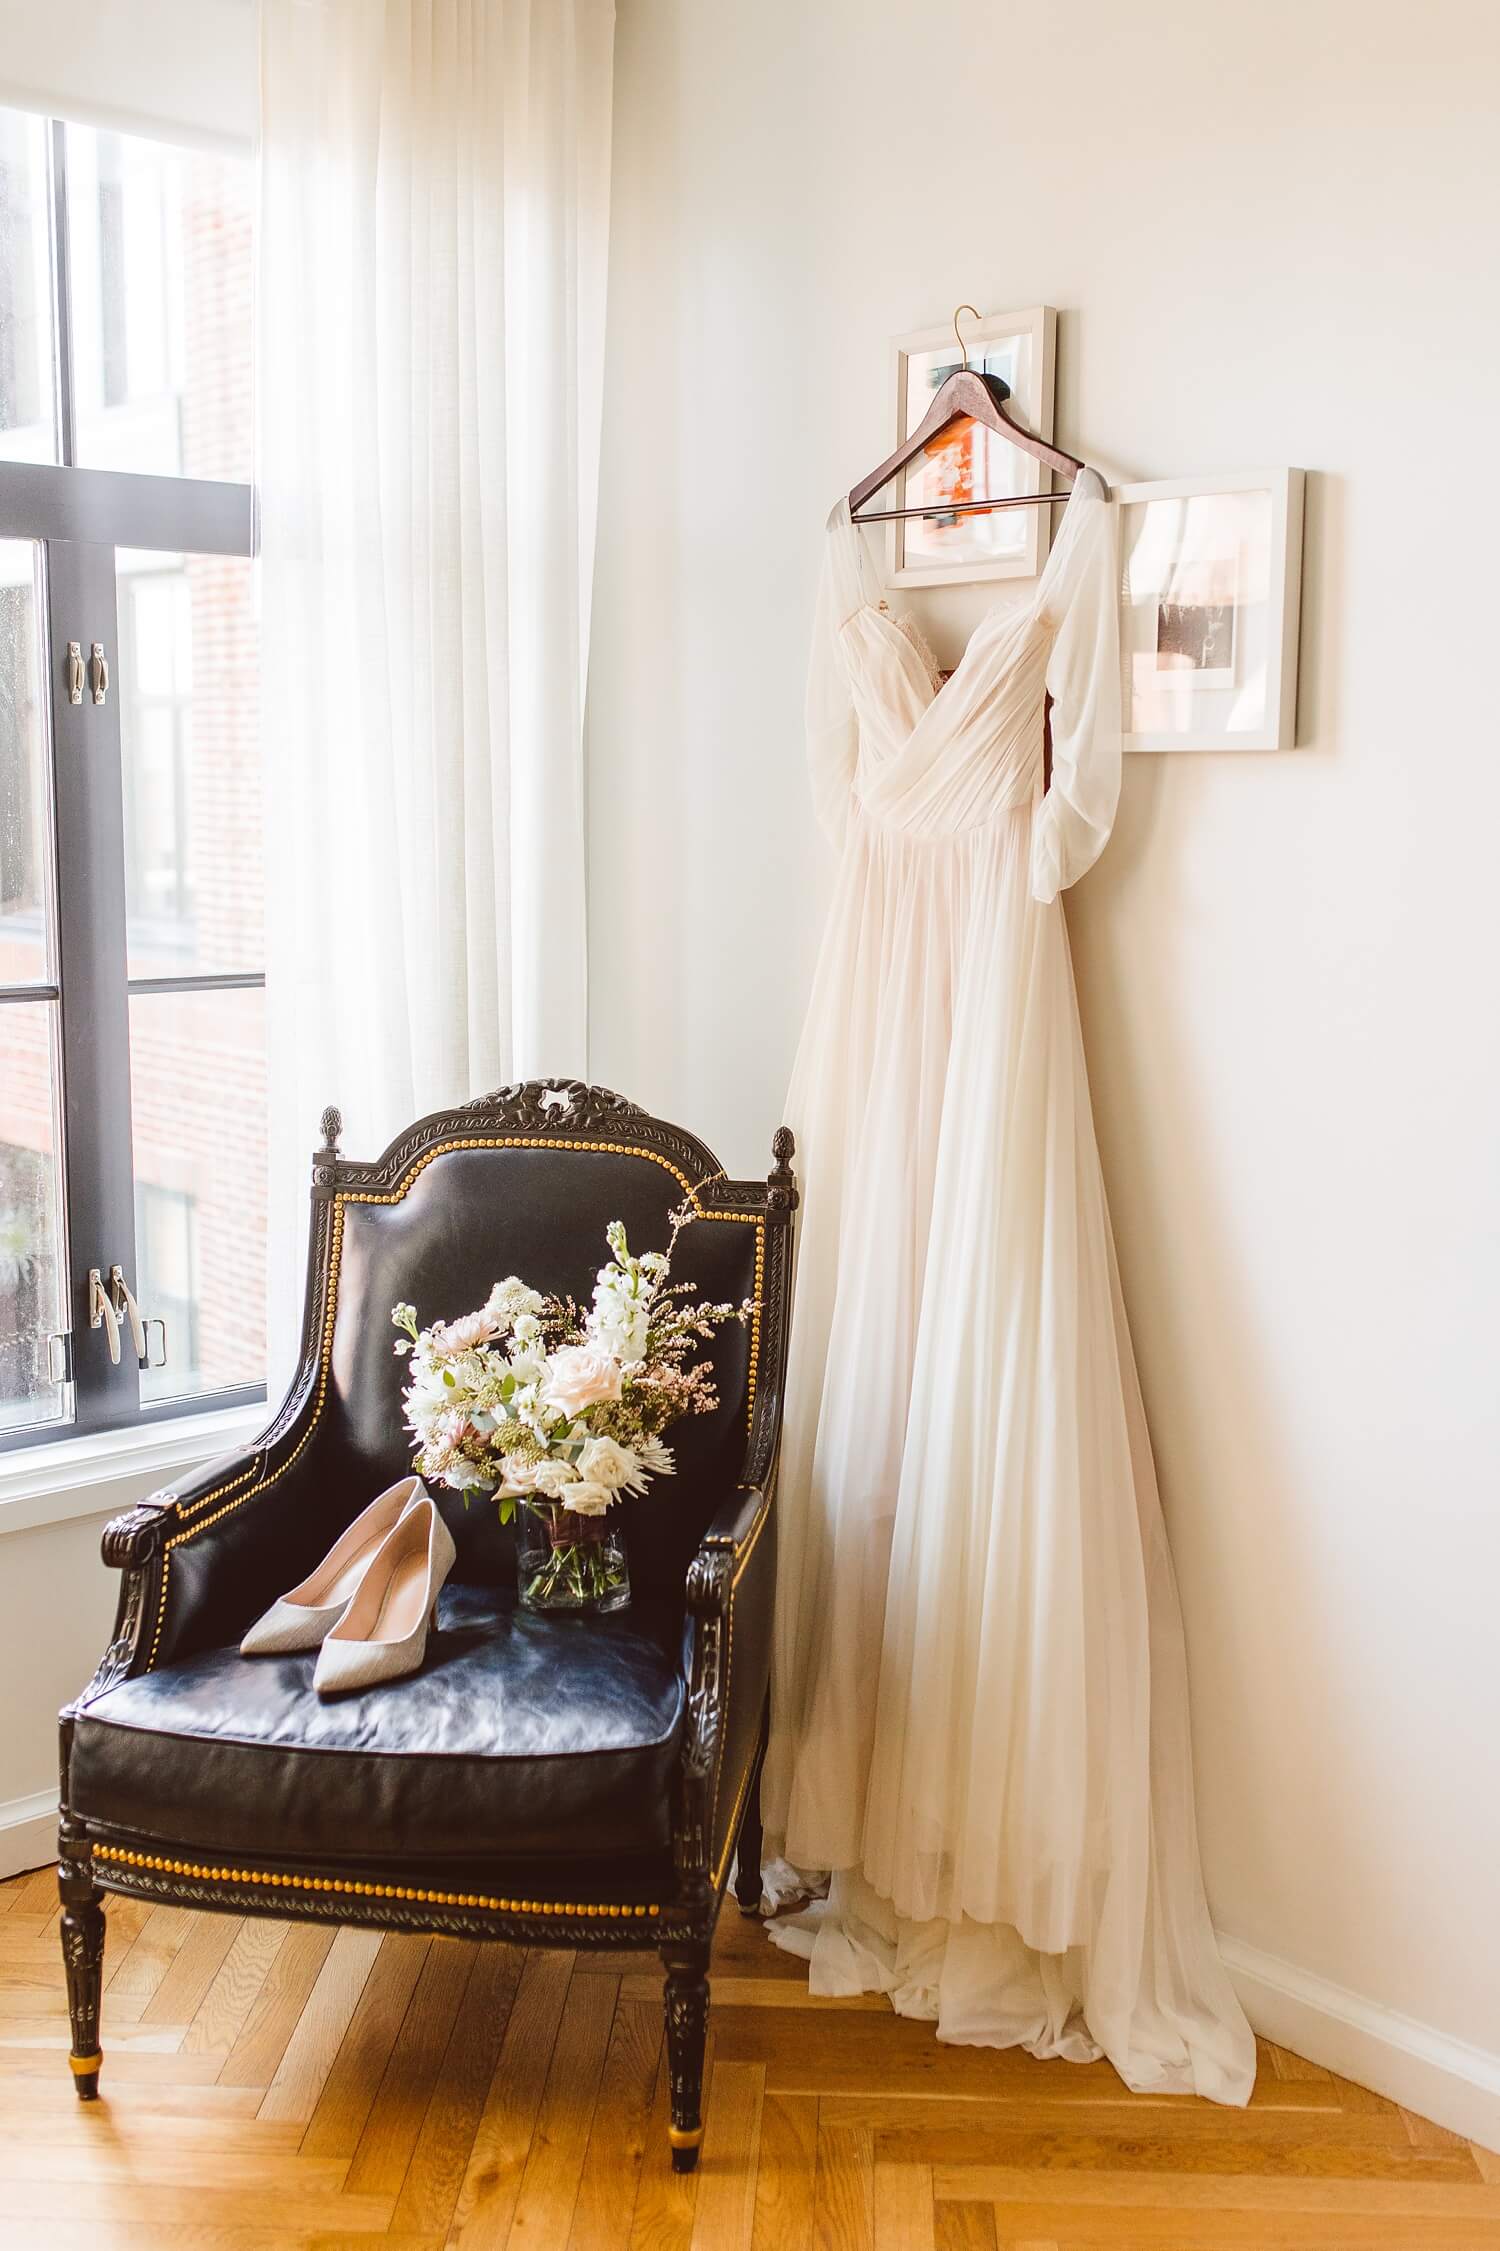 Chiffon wedding dress hanging behind chair with bouquet and shoes | Brooke Michelle Photography